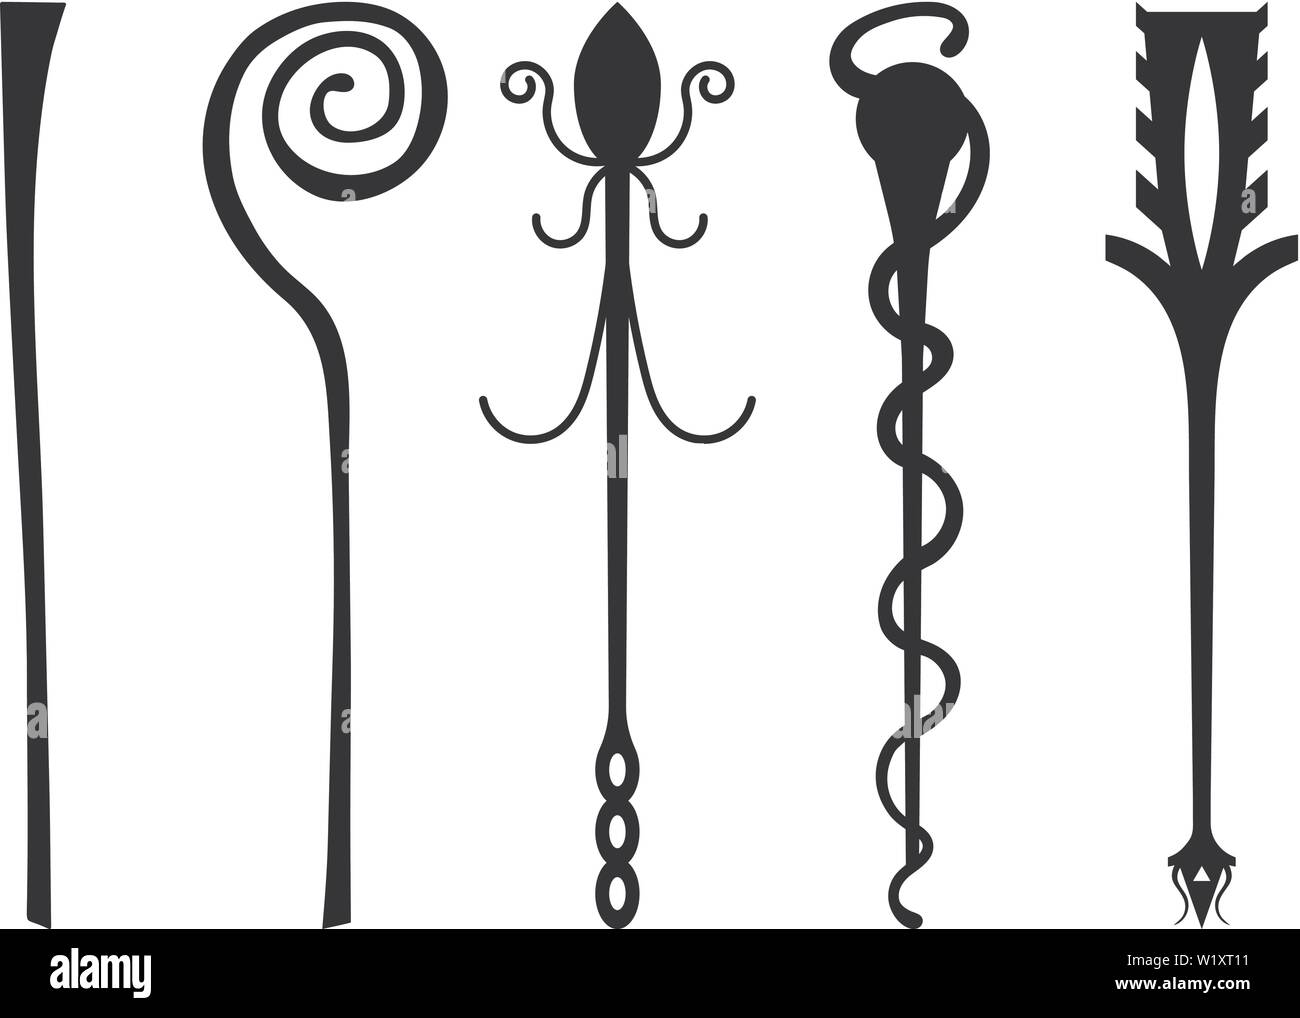 Set of Black Silhouette Staff Icons isolated on white background. Magic Wand, Scepter, Stick, Rod. Vector Illustration for Your Design, Game, Card, We Stock Vector